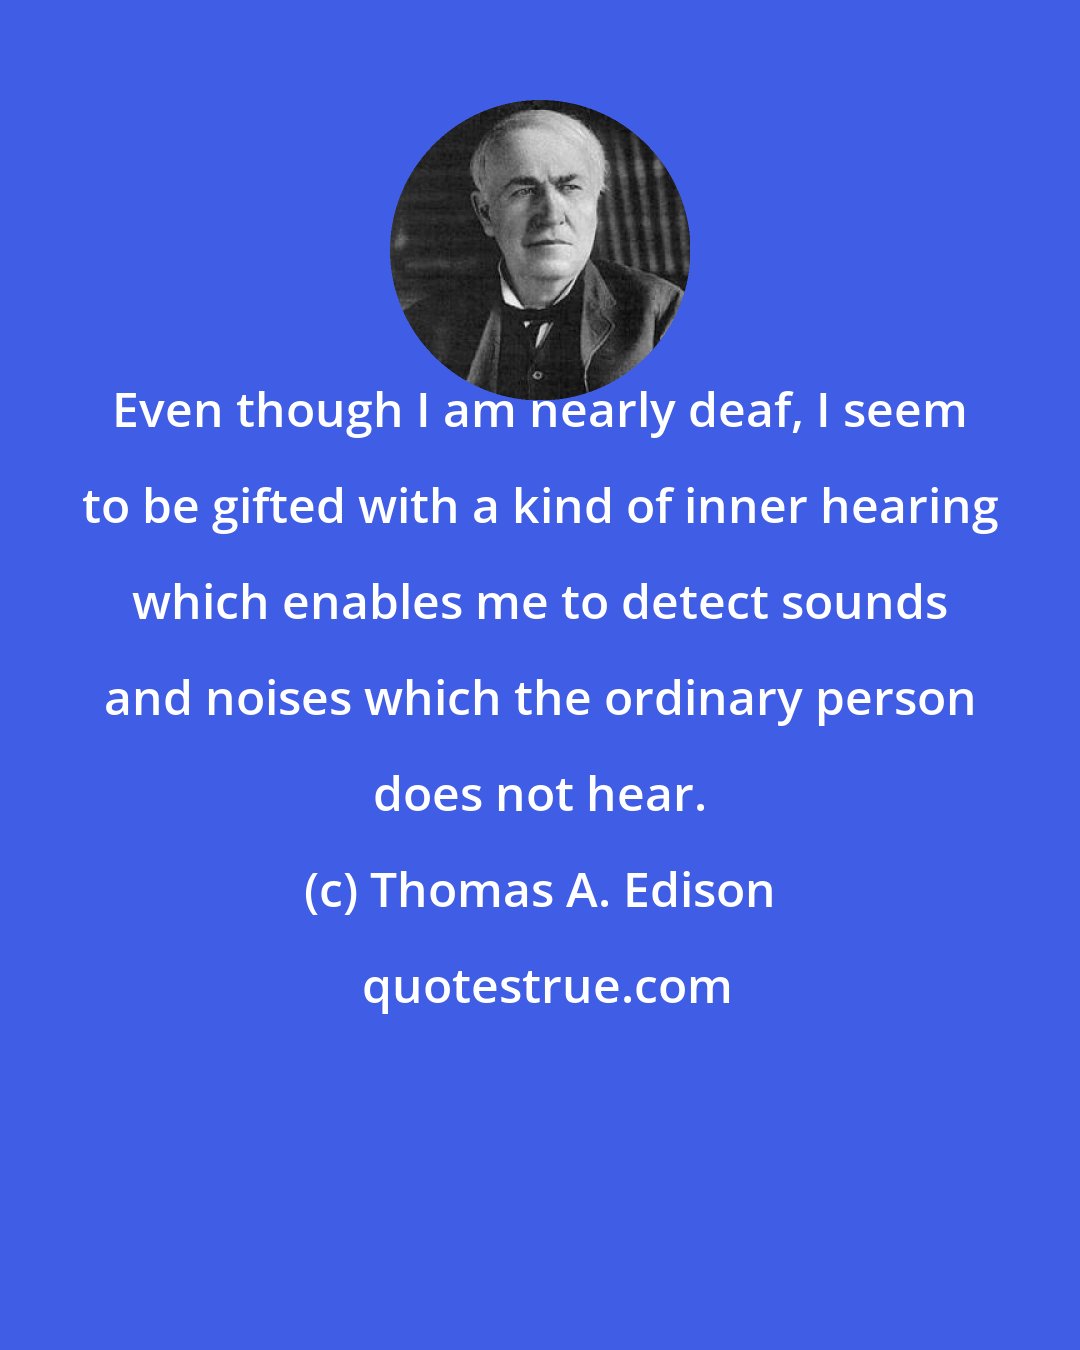 Thomas A. Edison: Even though I am nearly deaf, I seem to be gifted with a kind of inner hearing which enables me to detect sounds and noises which the ordinary person does not hear.